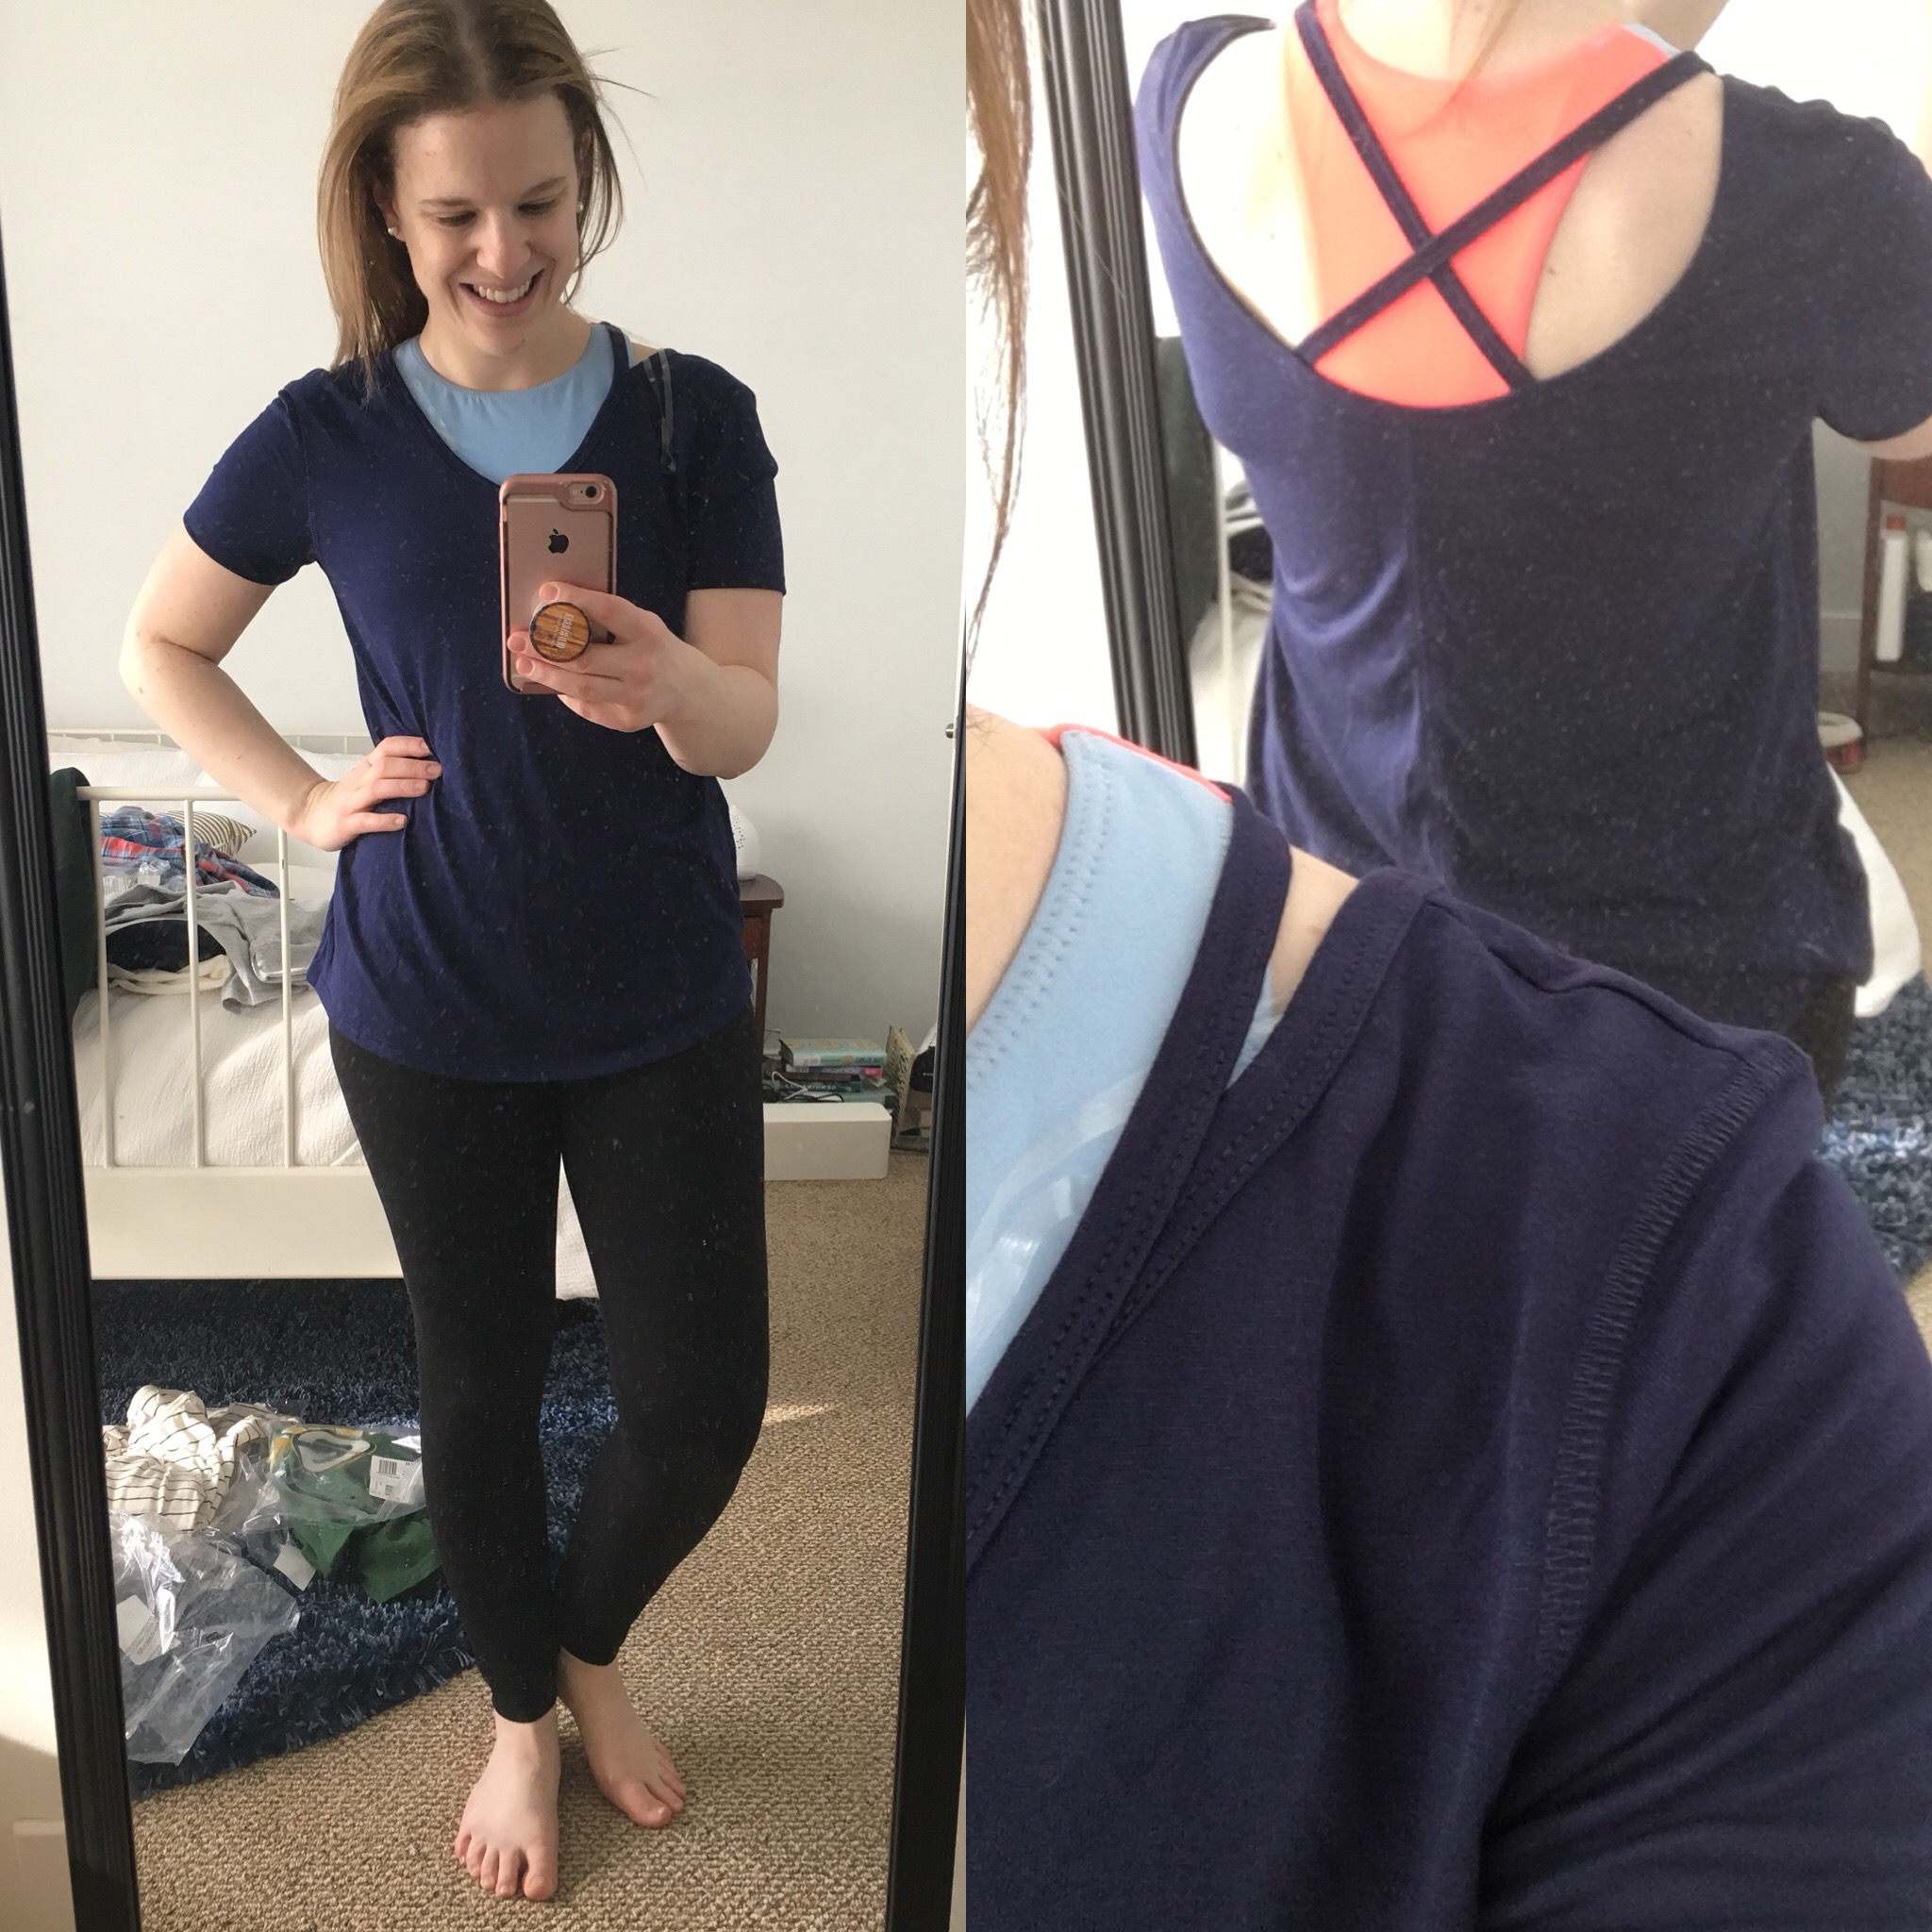 Shopping Reviews, Vol. 53: J.Crew Factory Activewear, Shopping Reviews, Vol. 53: J.Crew Factory Activewear, | Something Good, , @danaerinw, Old Navy Go-Dry Strappy Tee